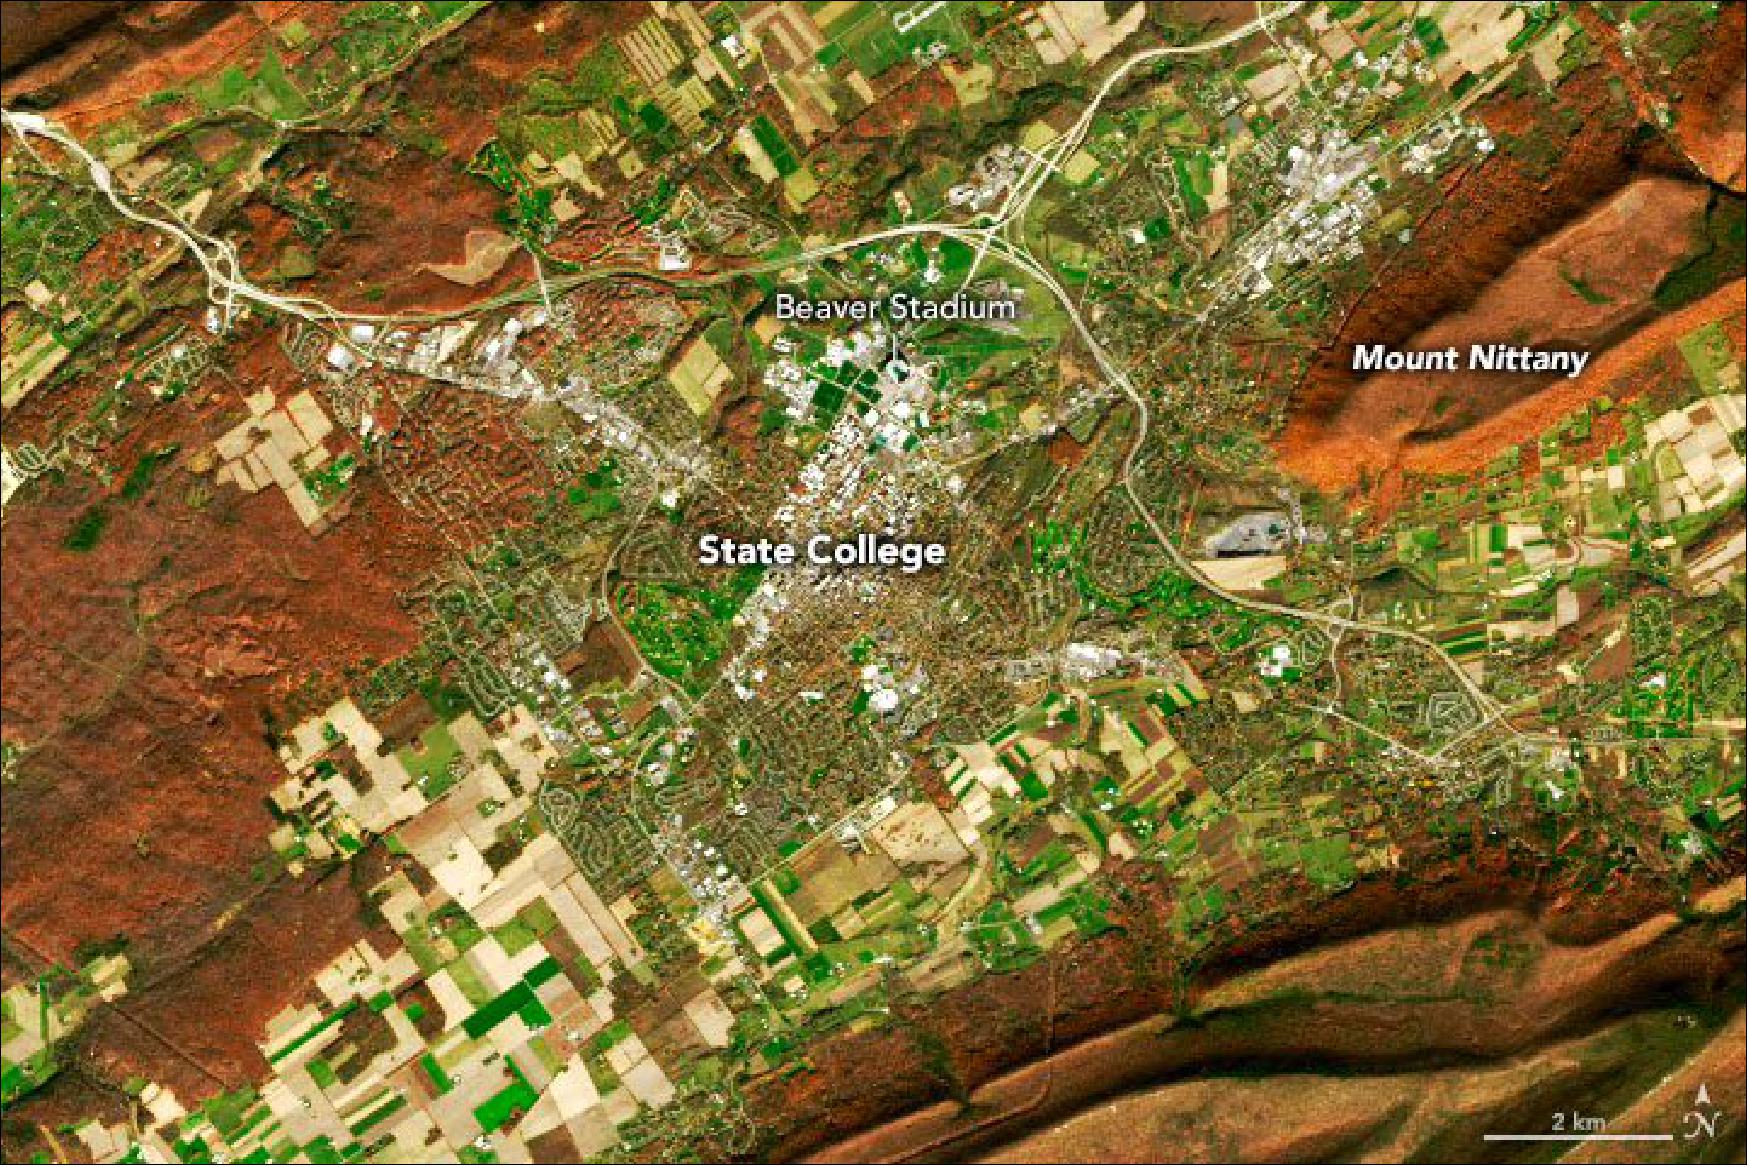 Figure 13: Detail image of State College, Pennsylvania. The close-up and oblique satellite views capture Mount Nittany, State College, and University Park, home of The Pennsylvania State University. The mascot of the university and several other groups in the area is the Nittany Lion, a localized name for the now-extinct eastern cougar (image credit: NASA Earth Observatory)